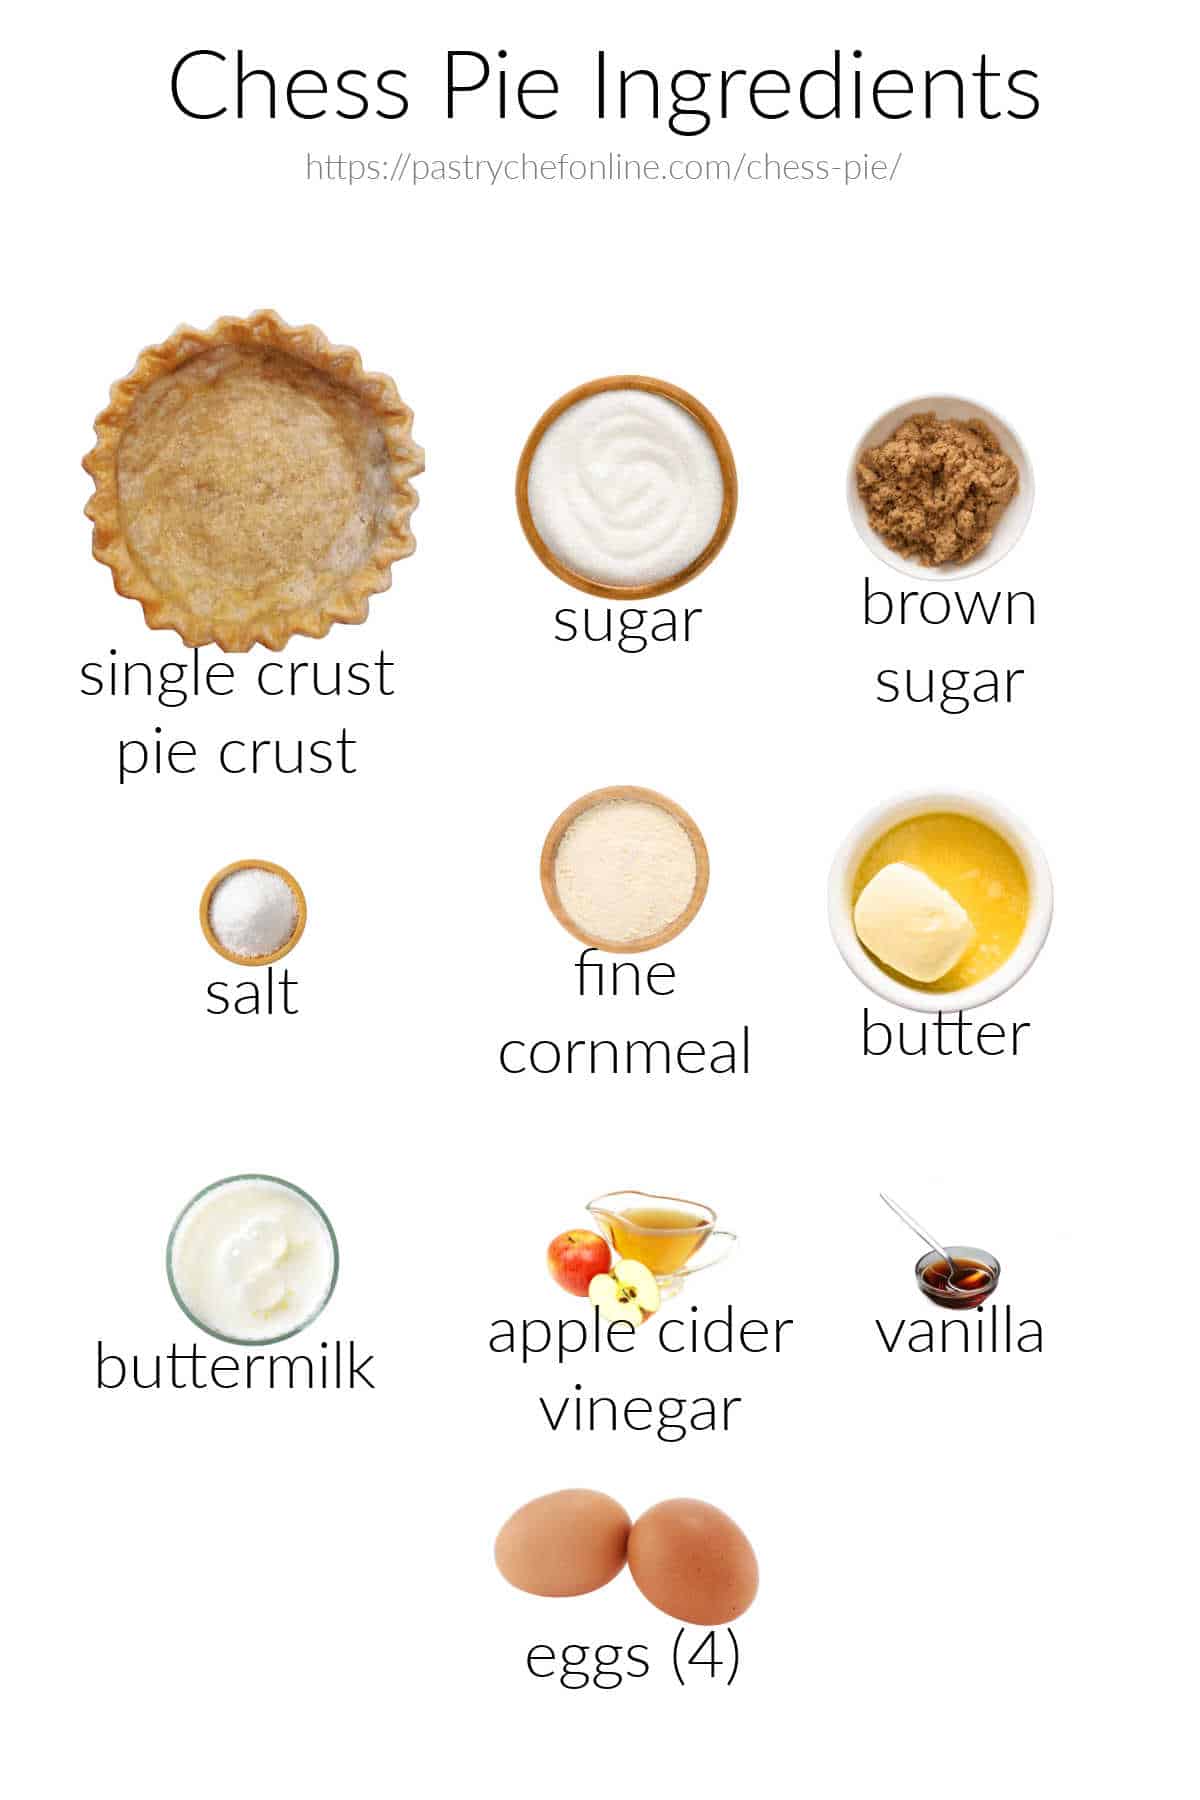 A collage of all the ingredients needed to make chess pie, all labeled on a white background: pie crust, sugar, brown sugar, salt, fine cornmeal, butter, buttermilk, apple cider vinegary, vanilla, and eggs.